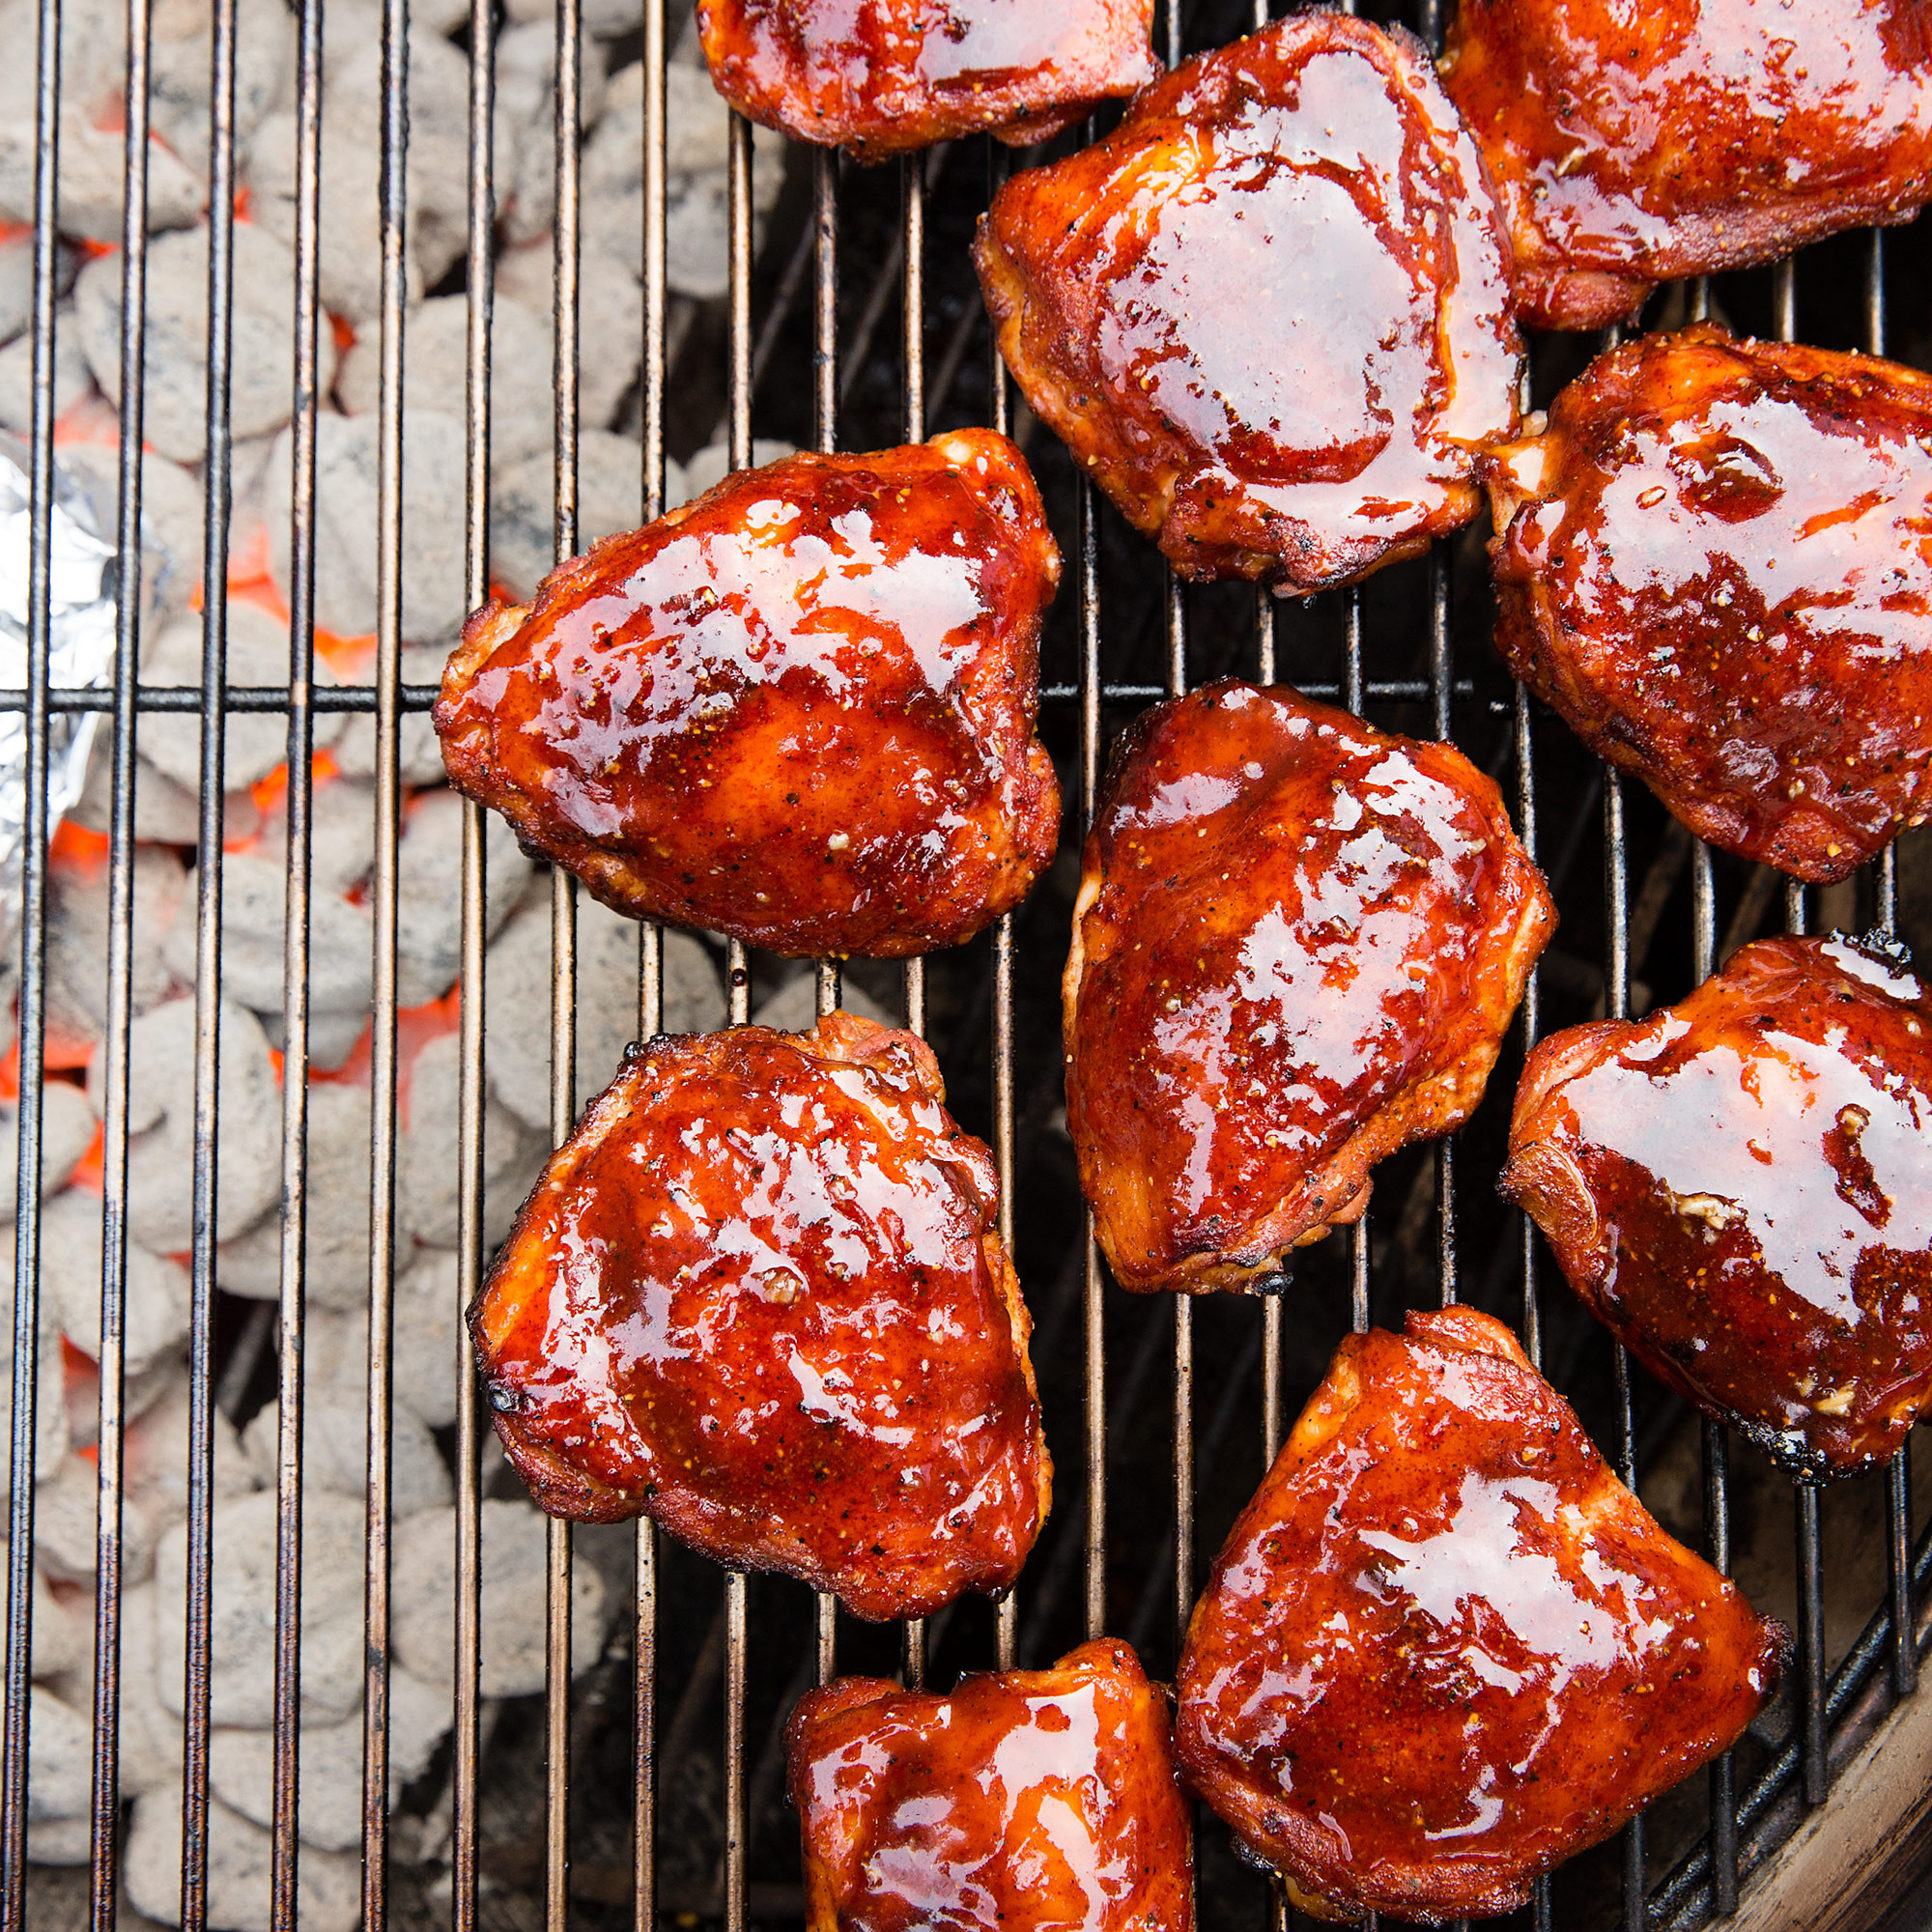 Barbeque Chicken Thighs Best Of Barbecued Chicken Thighs